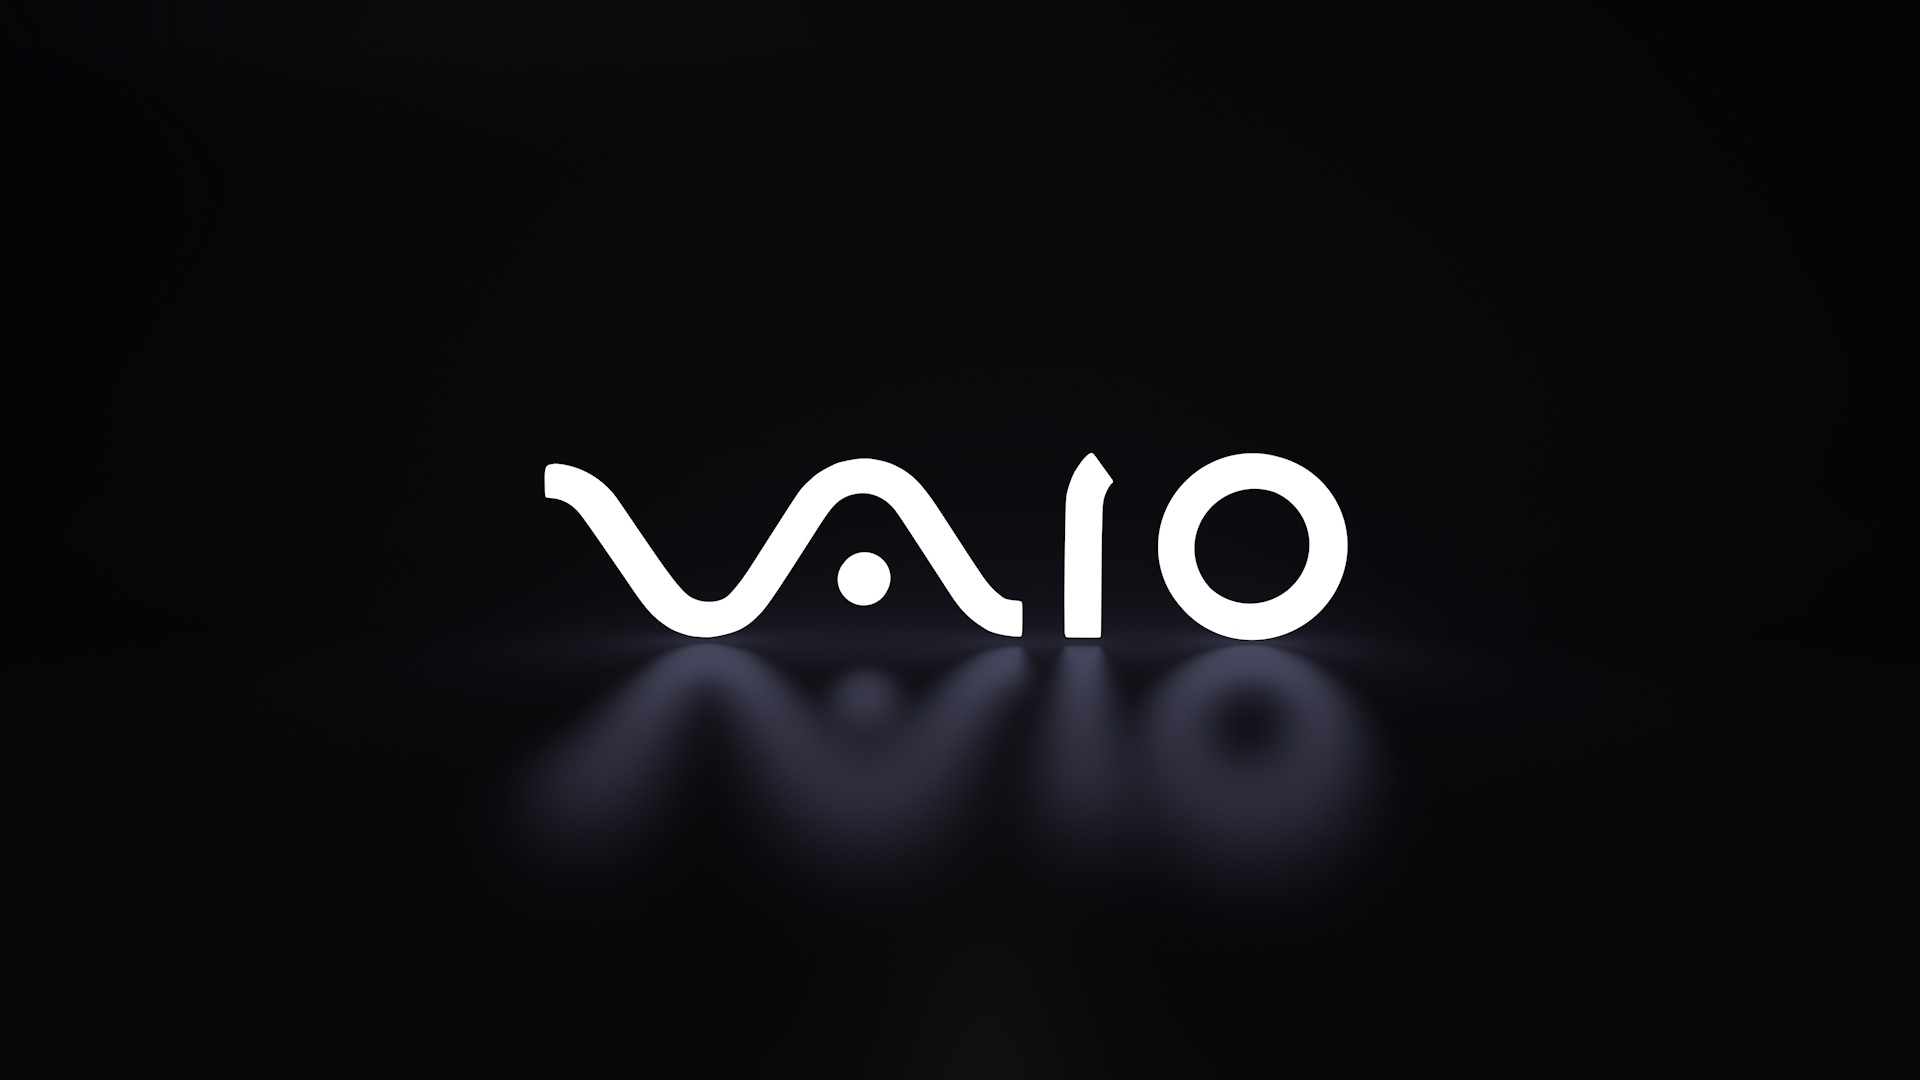 1920x1080 HD Sony Vaio Wallpapers \u0026 Vaio Backgrounds For Free Download